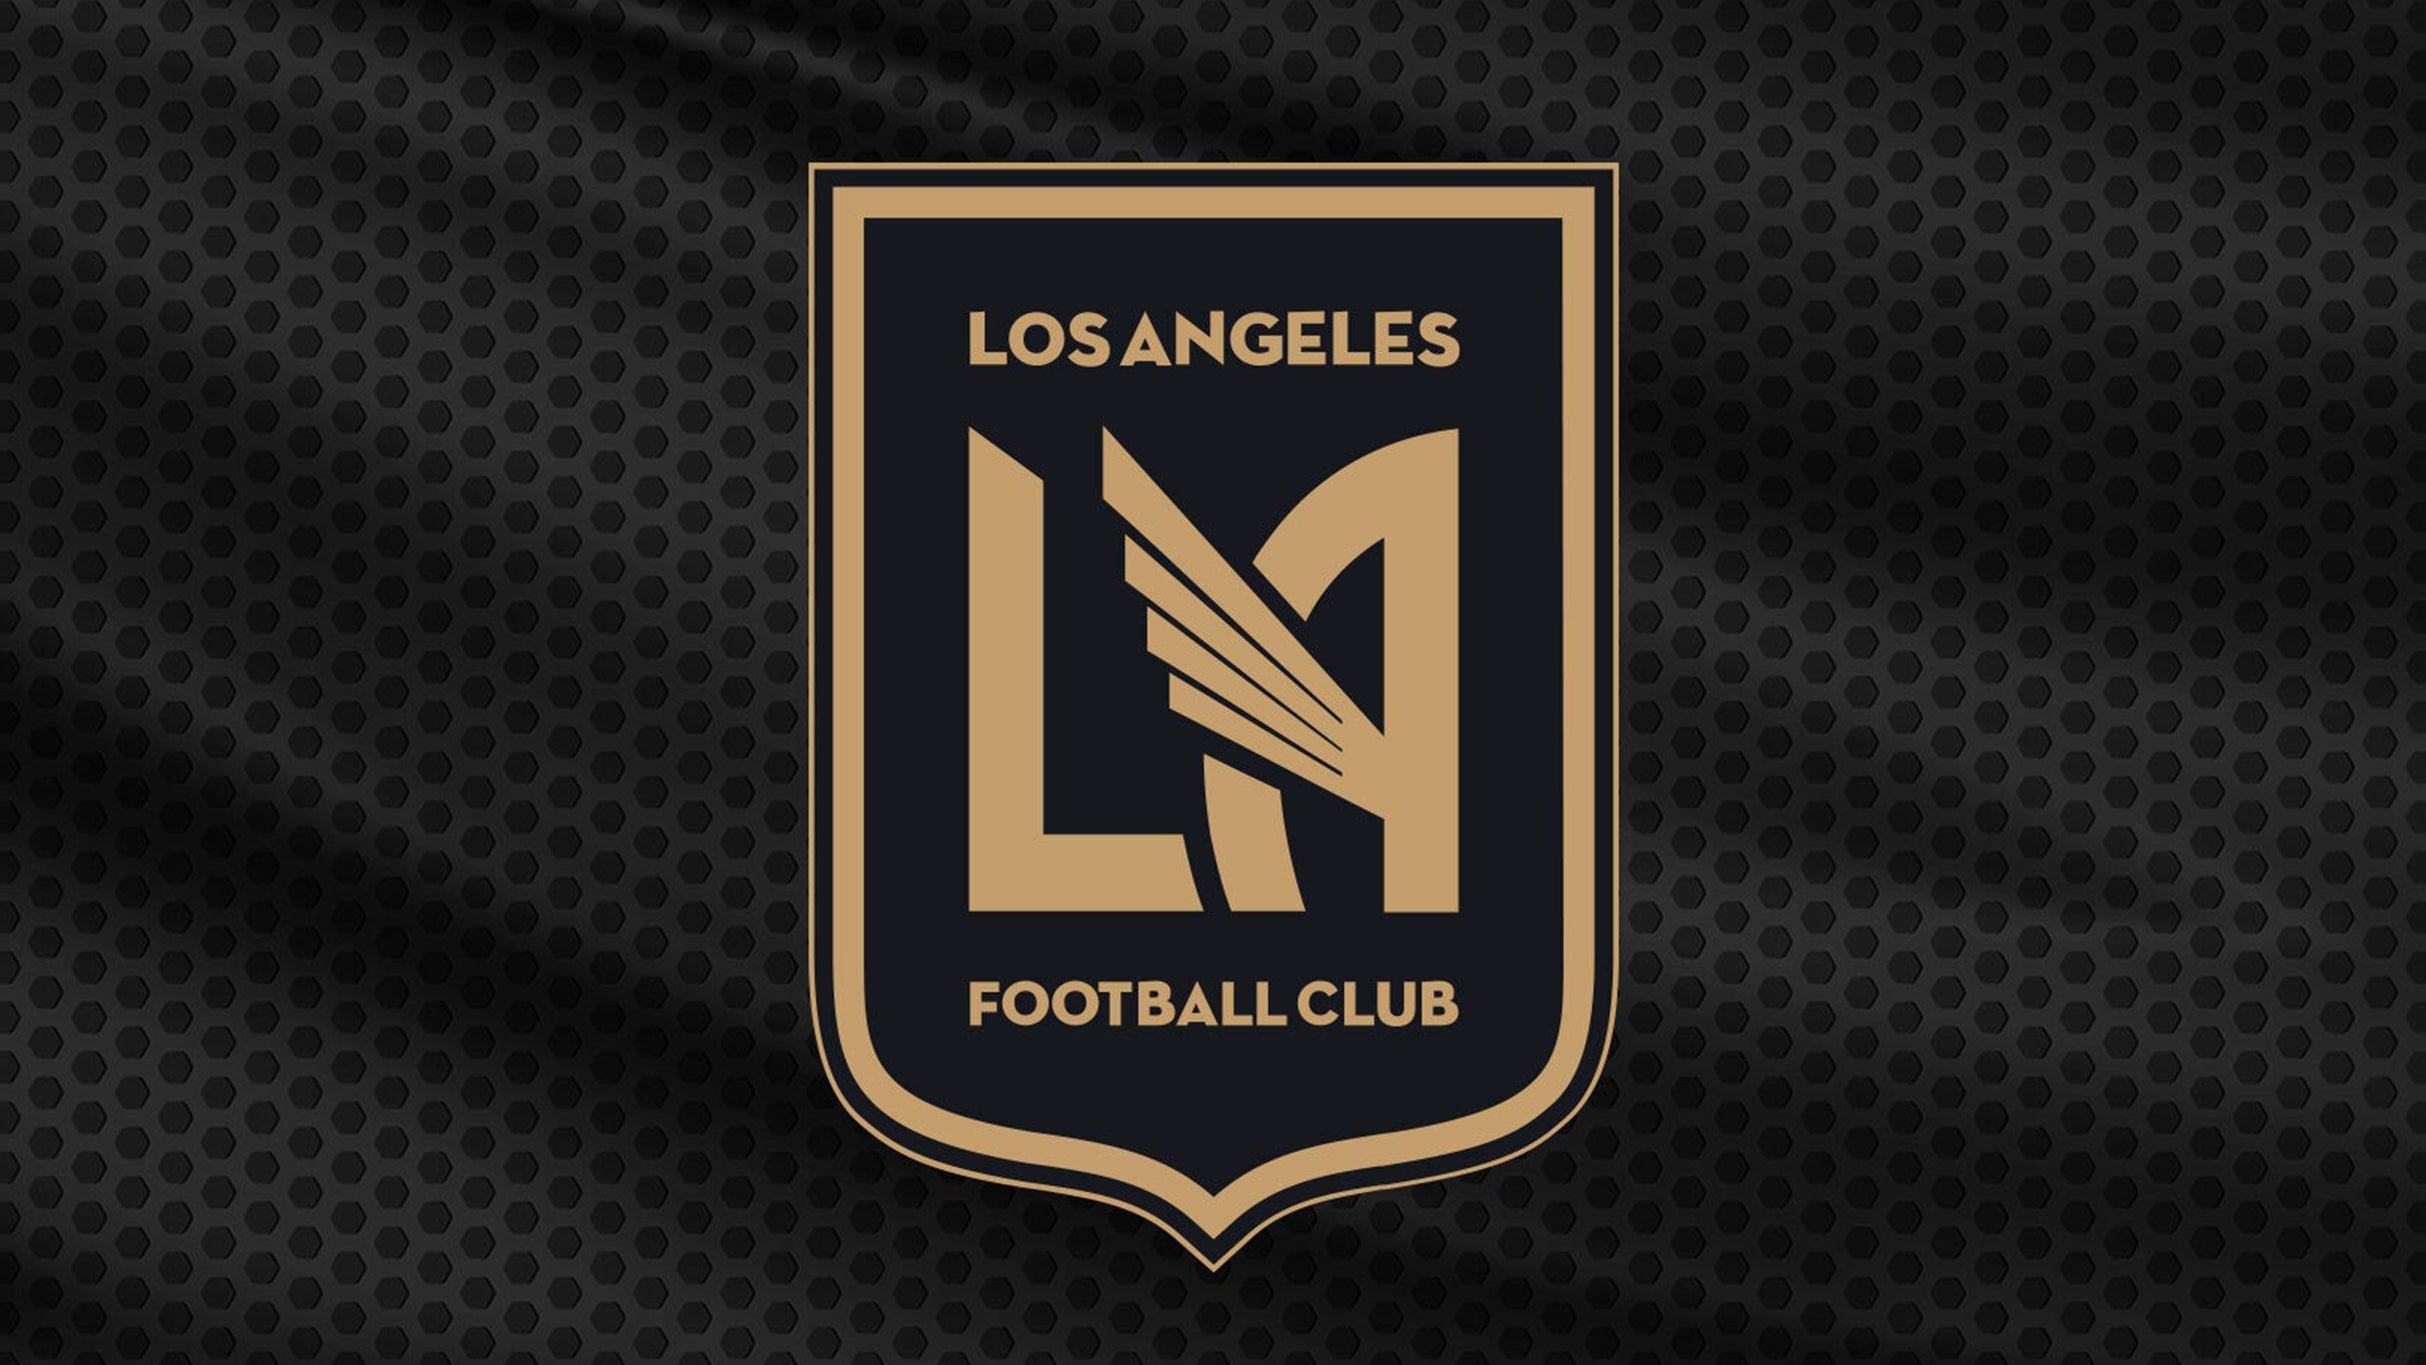 Main image for event titled Los Angeles Football Club vs. Columbus Crew